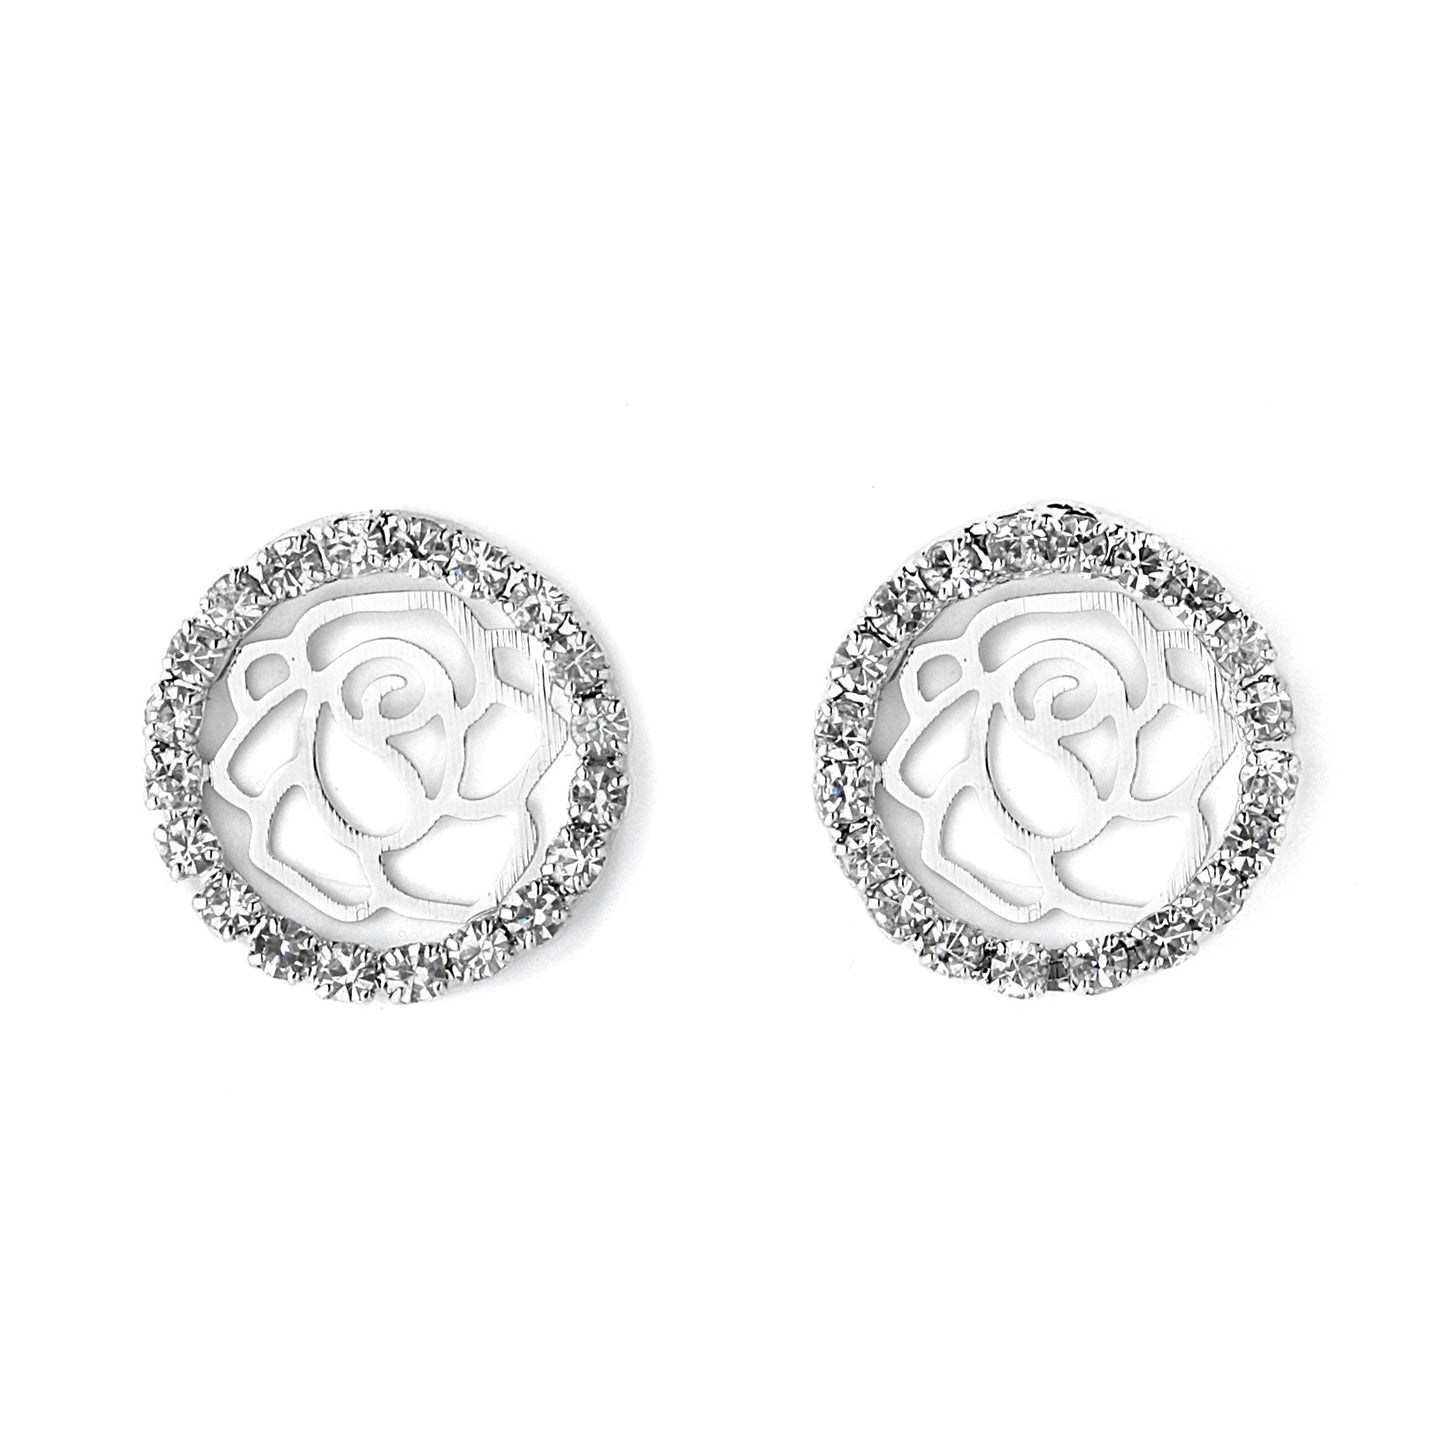 Round Pave CZ with Rose Pattern Earrings